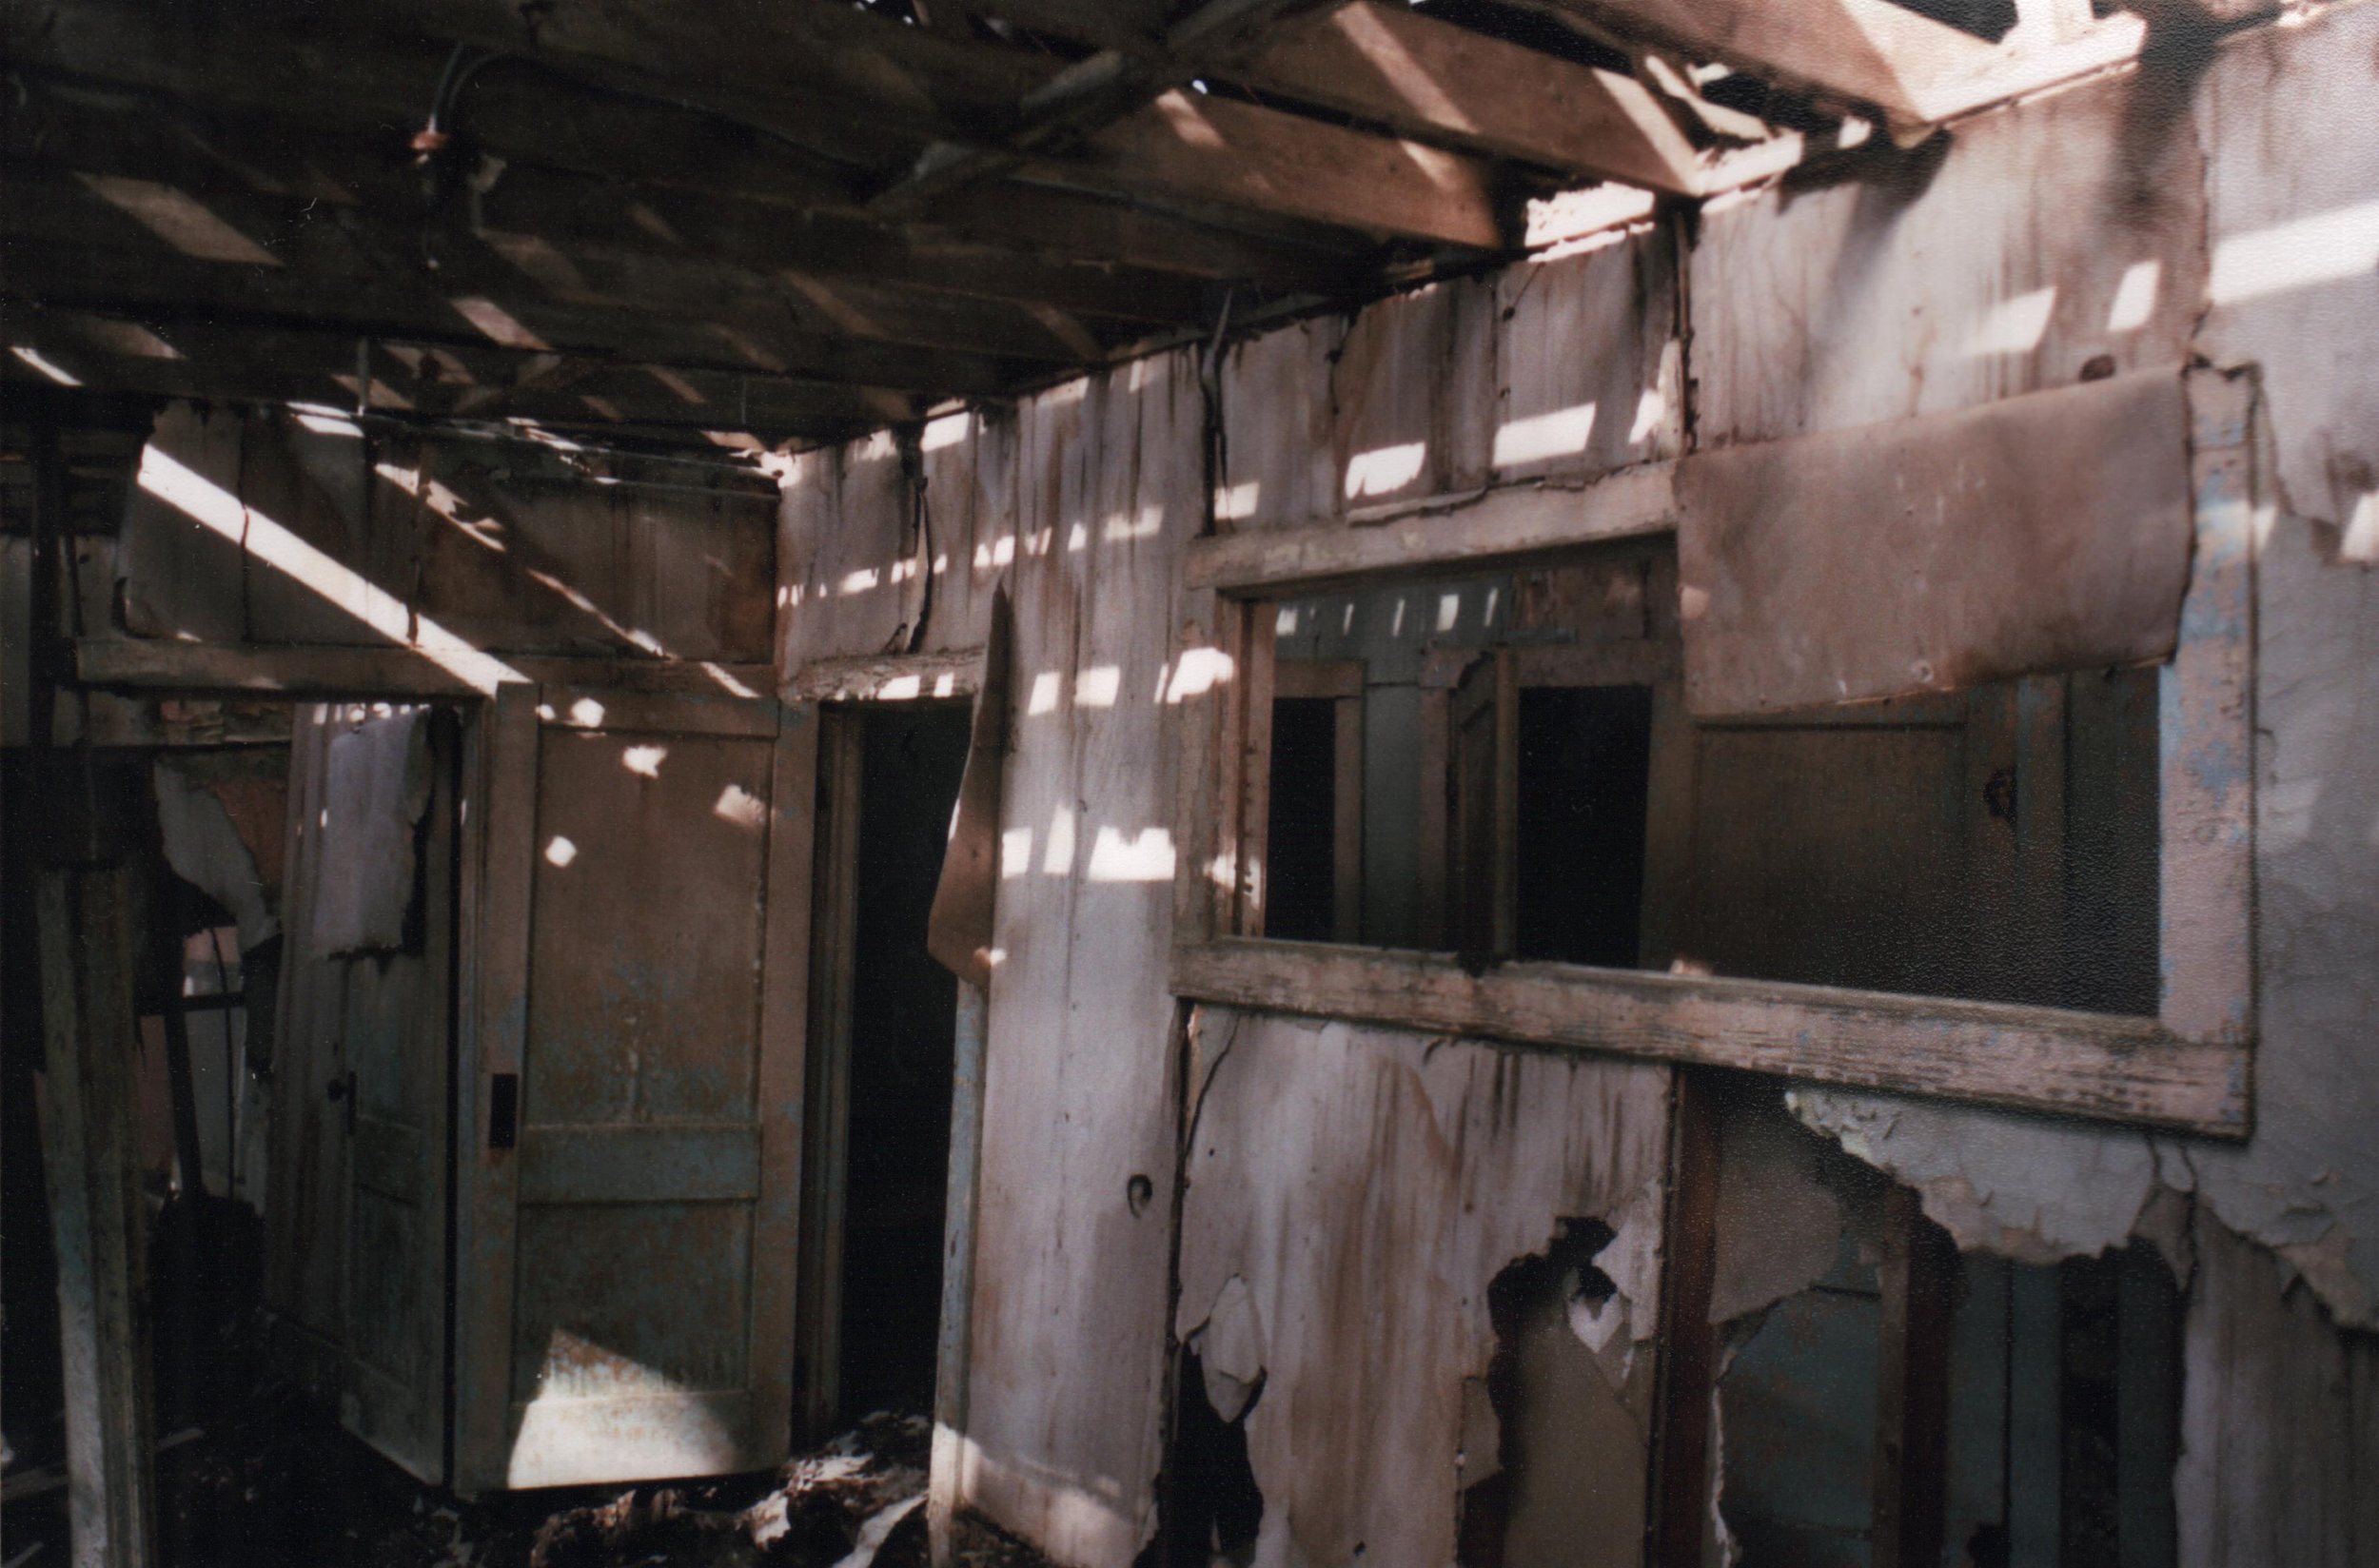 Order Up – This was the part of the mess hall of the mining camp, order window and all.